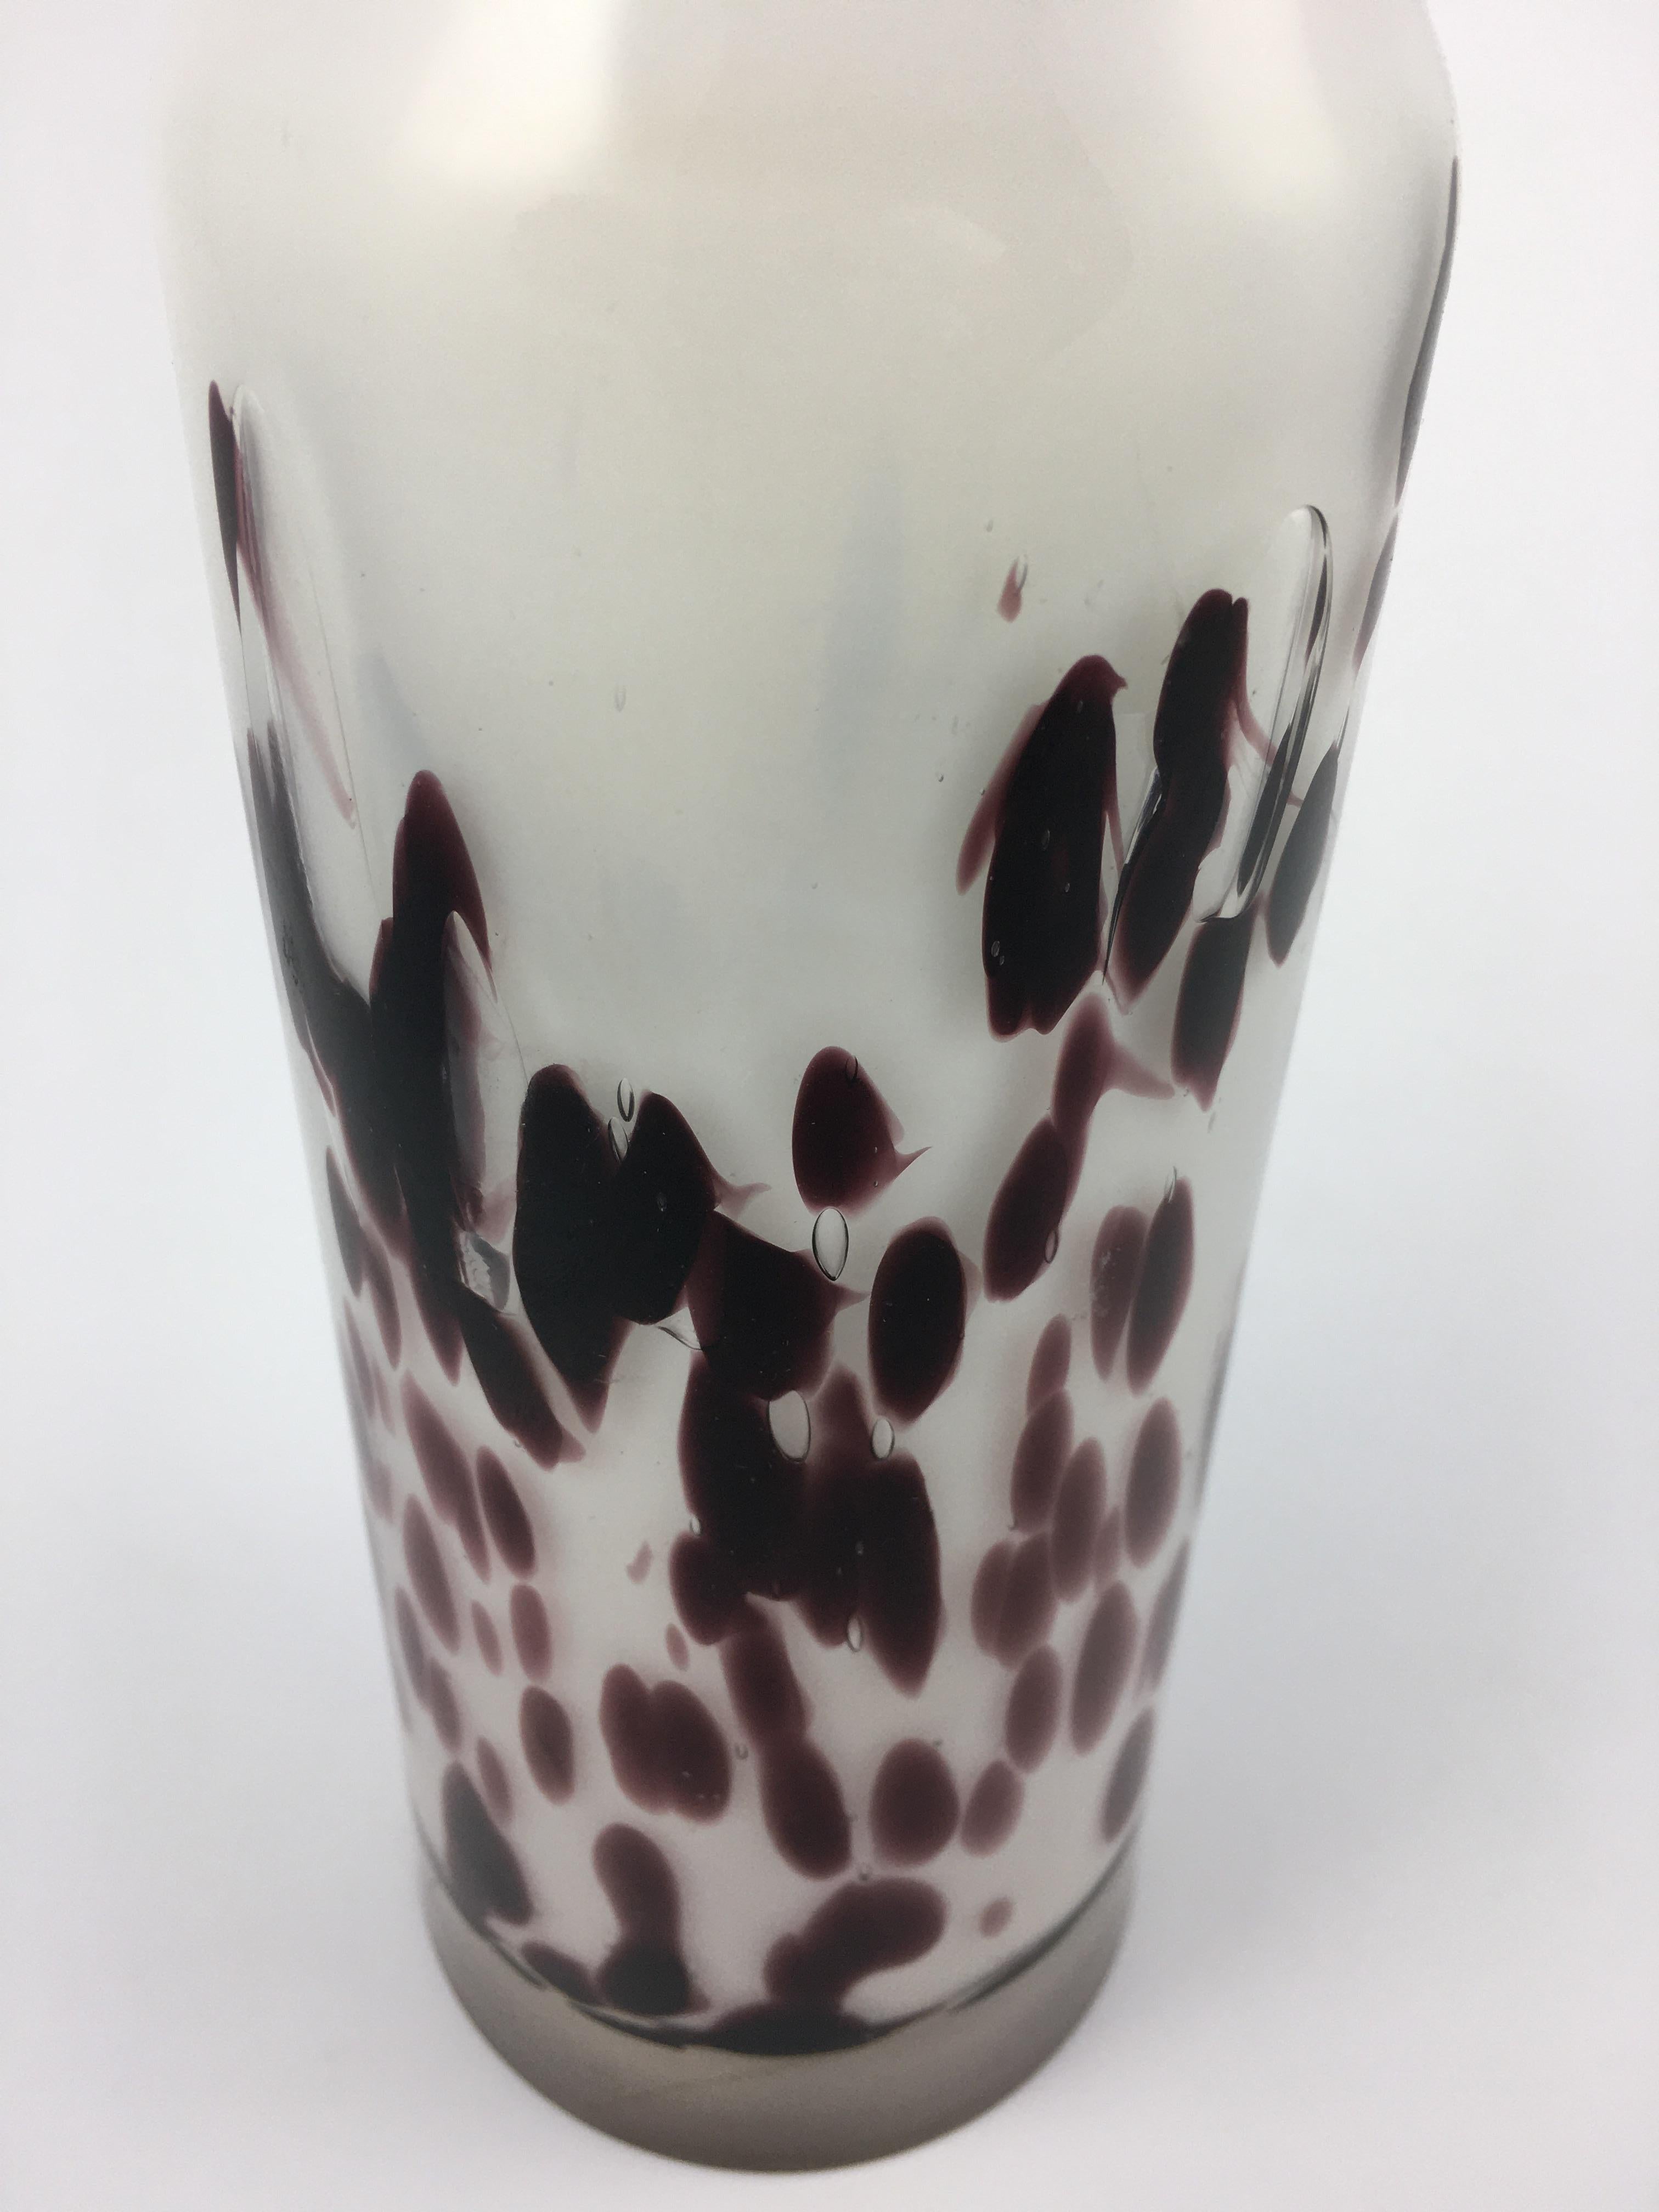 Mid-century Italian decor glass vase. Vintage vase with special dotted überfang coating. Milk glass vase with polka dot pattern, high neck and thick frosted base from the 1960s. Special Italian design, which can be a trendy home accessory even